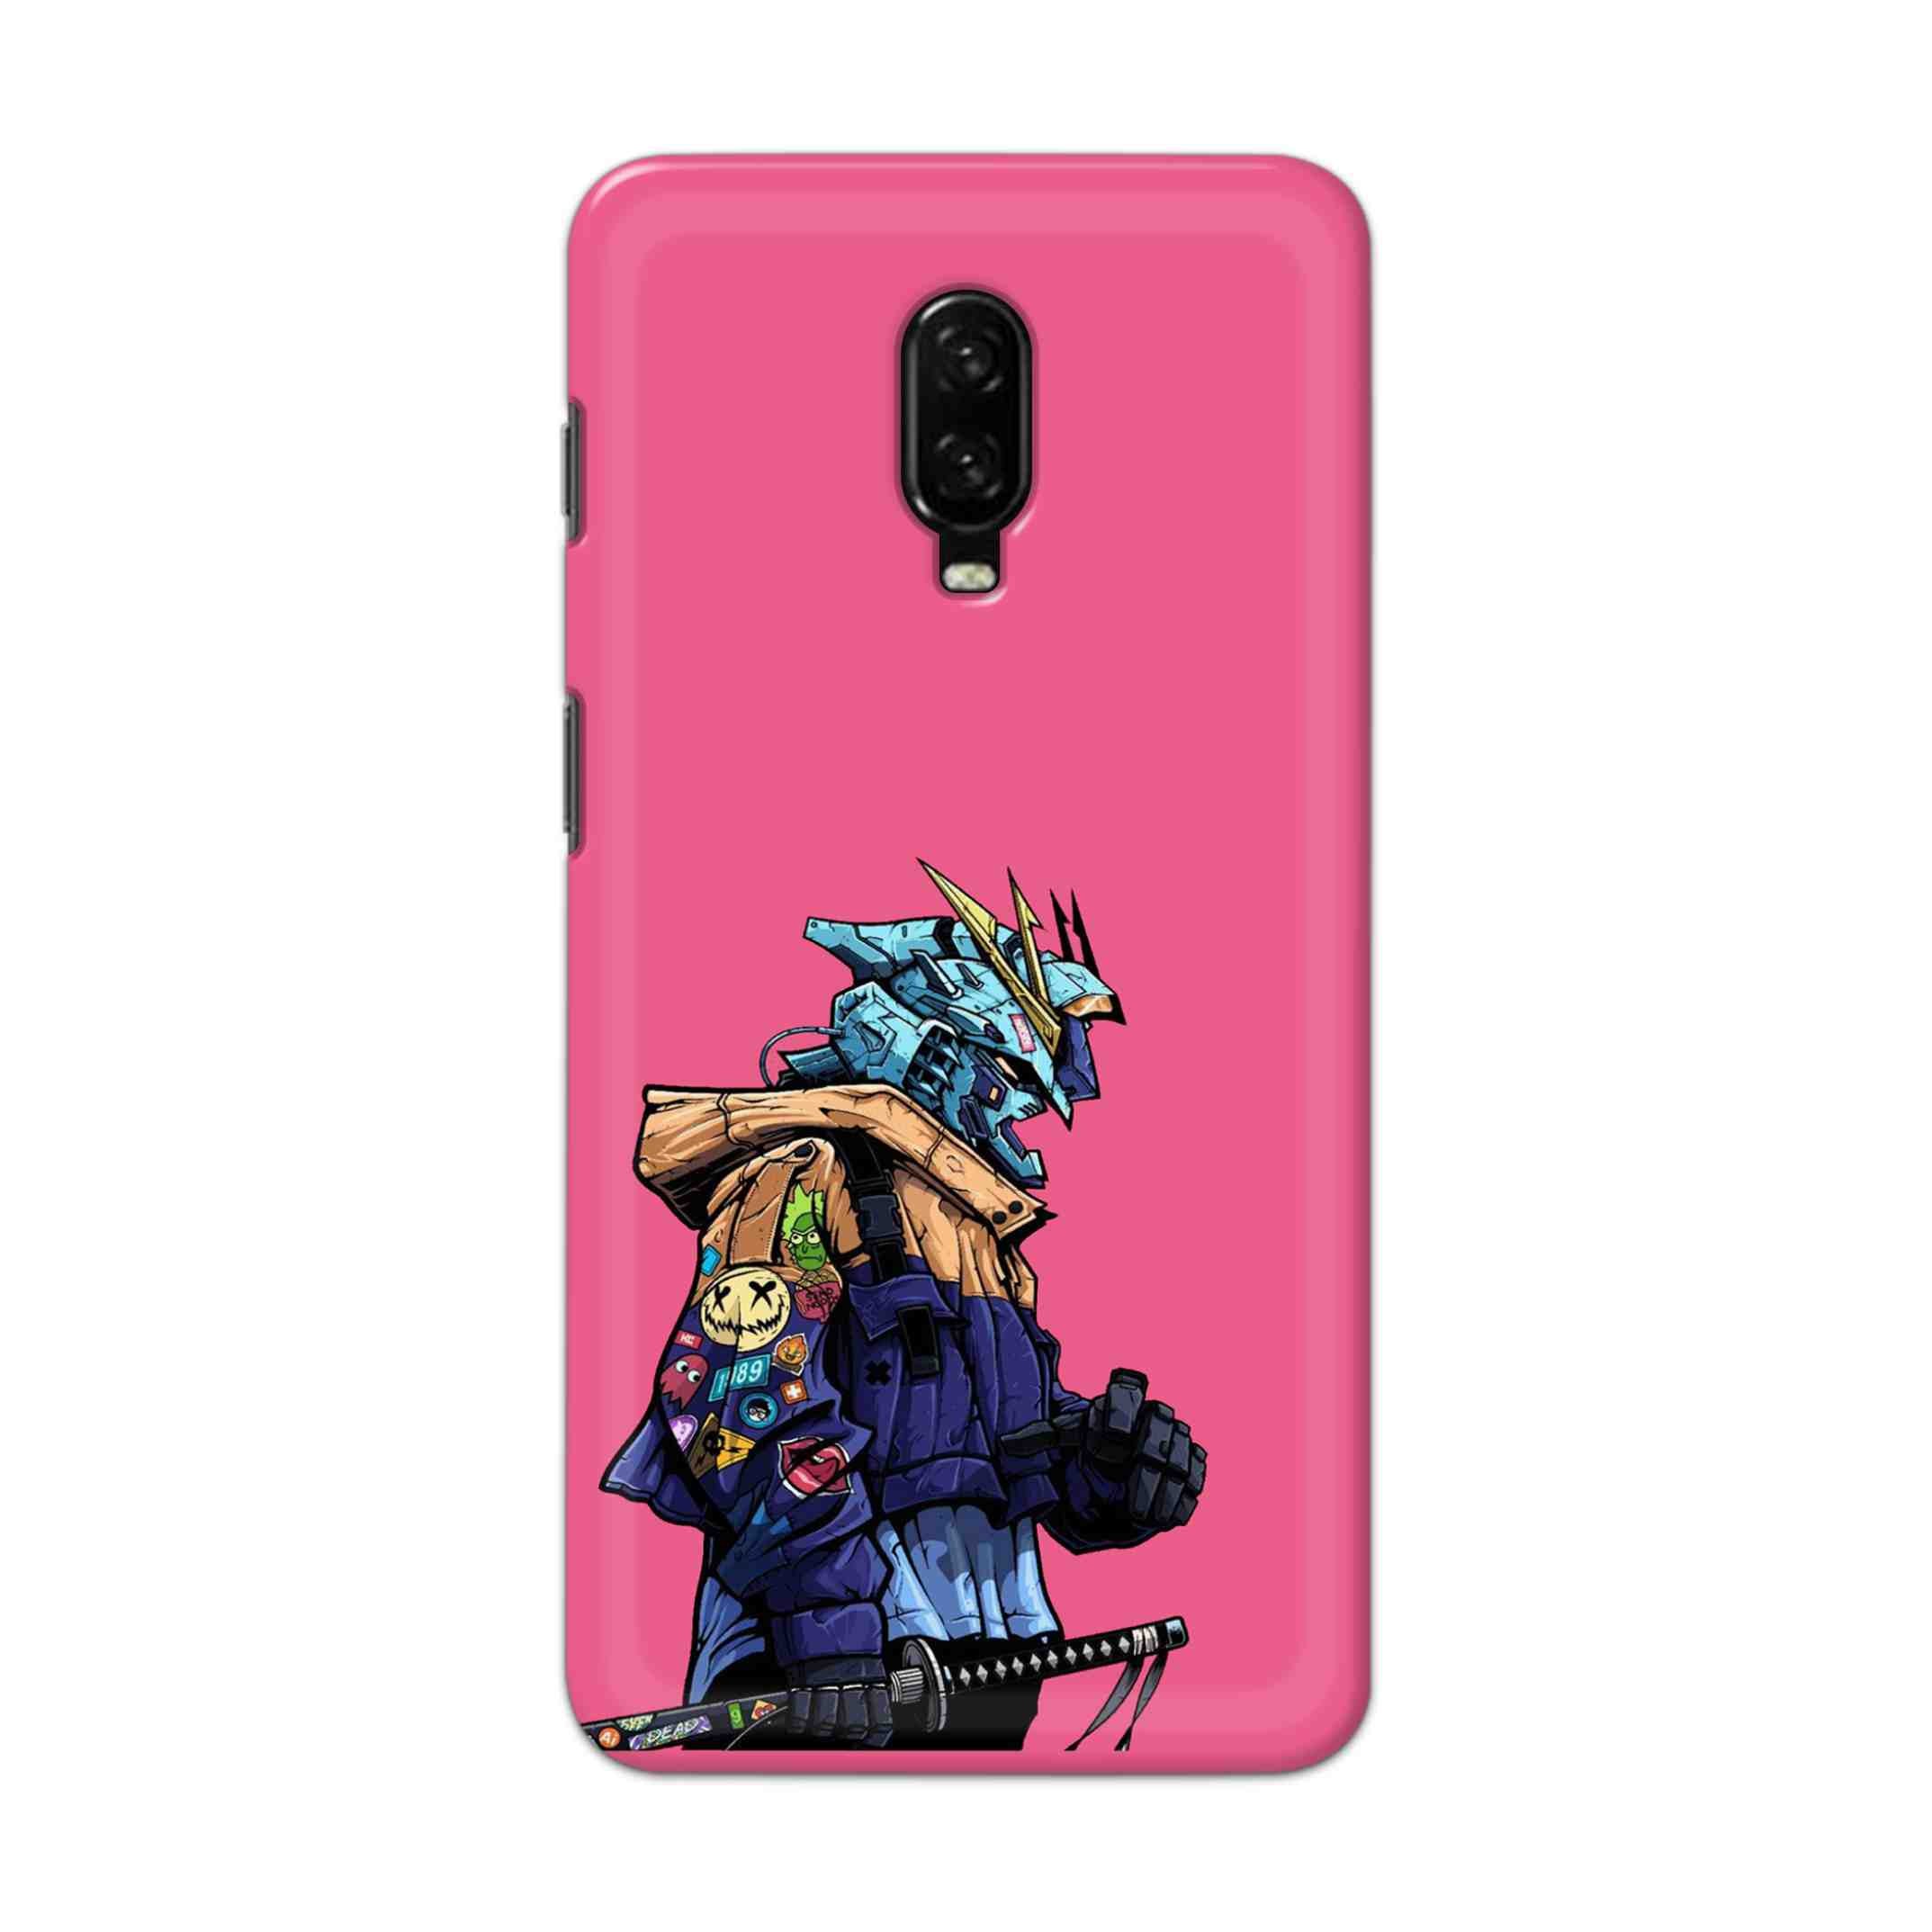 Buy Sword Man Hard Back Mobile Phone Case Cover For OnePlus 6T Online